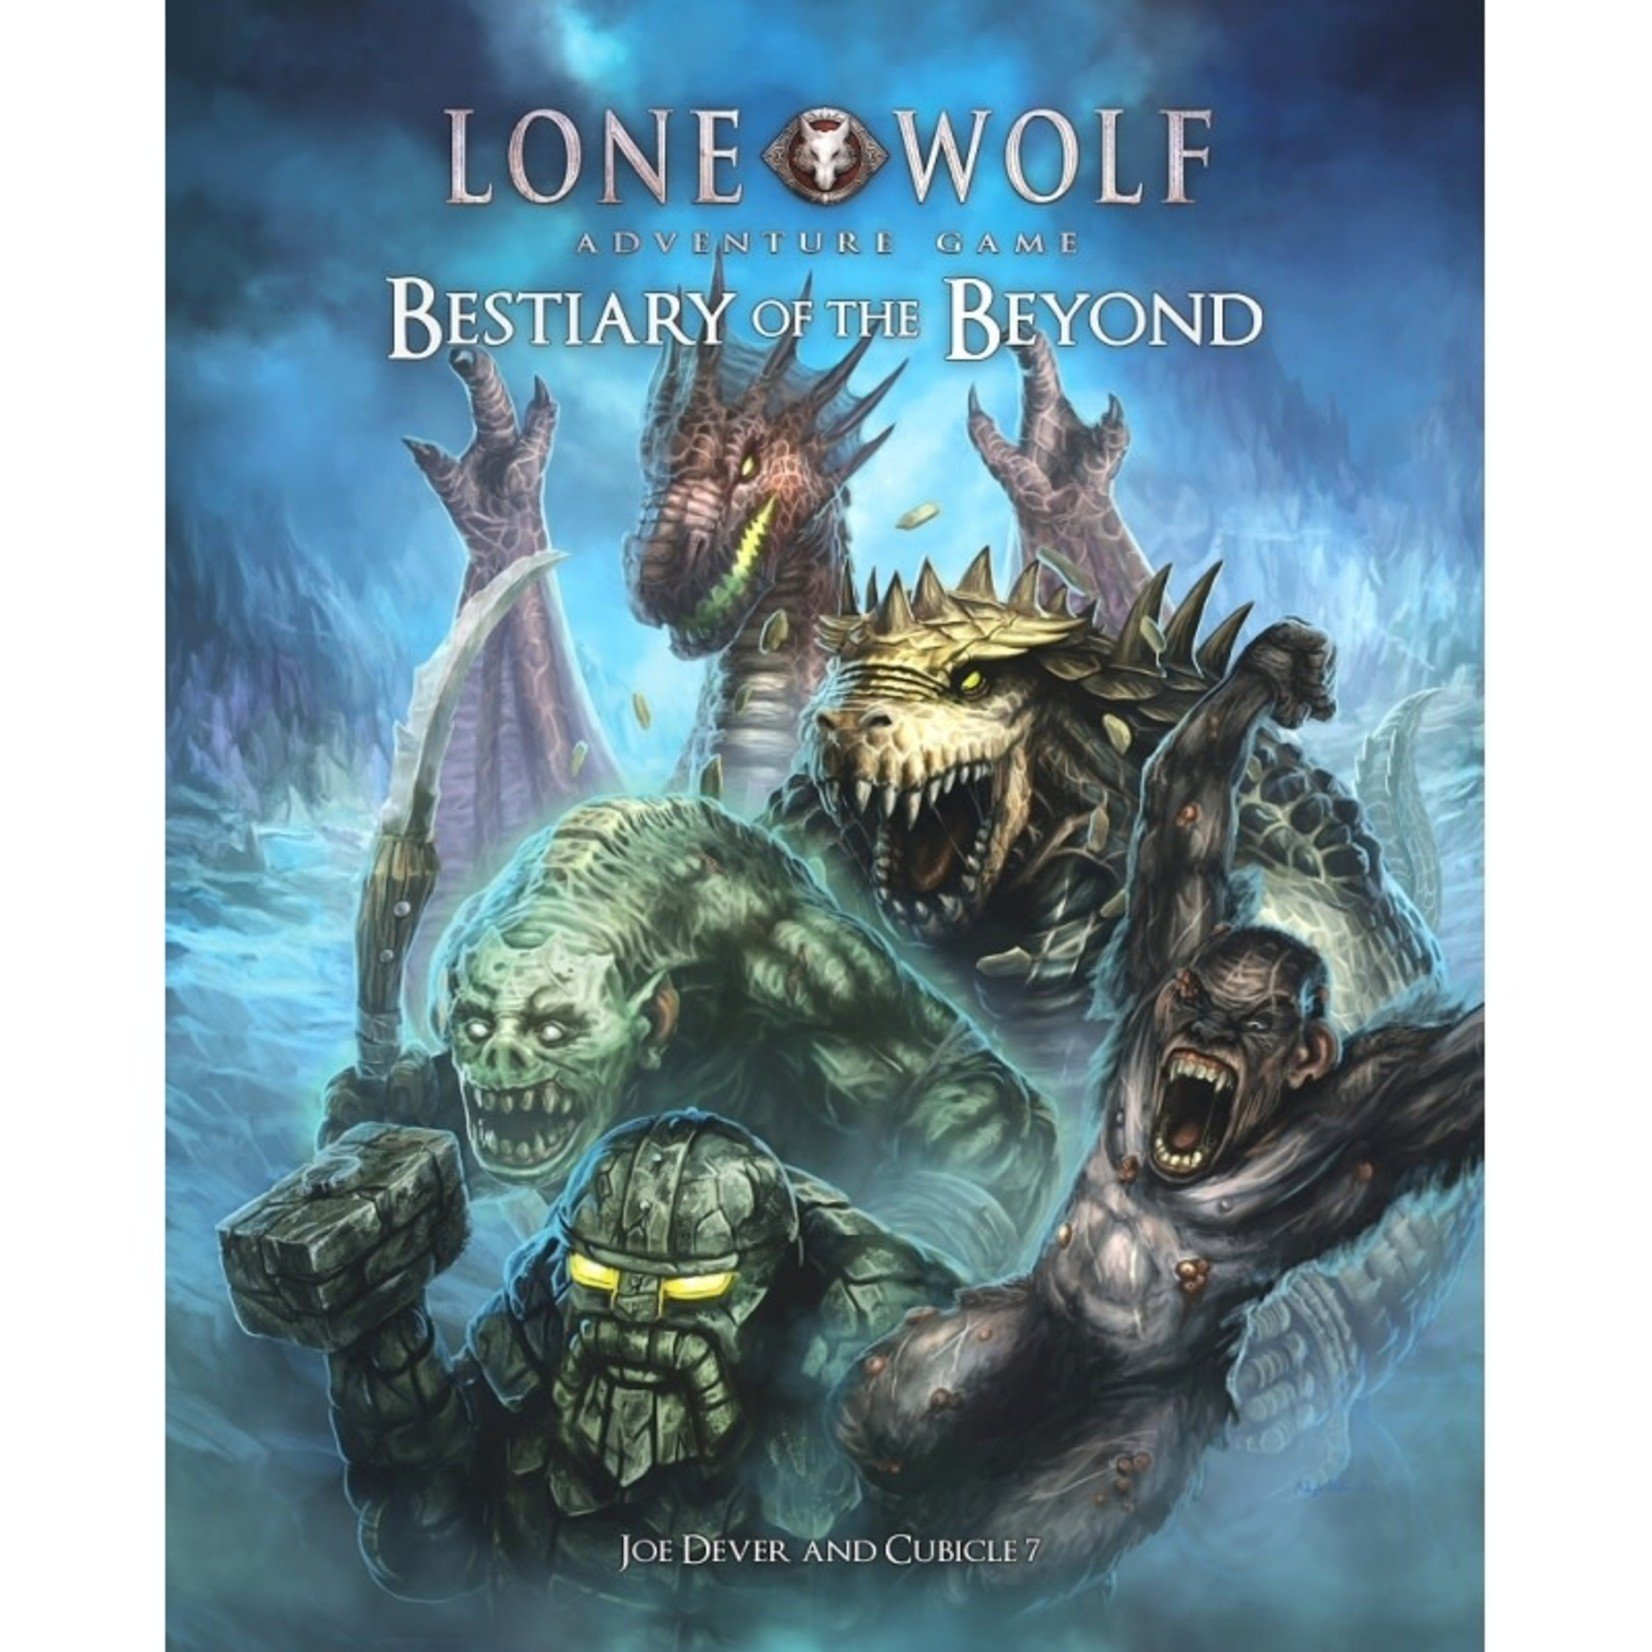 Cubicle 7 Lone Wolf Adventure Game: Bestiary of the Beyond